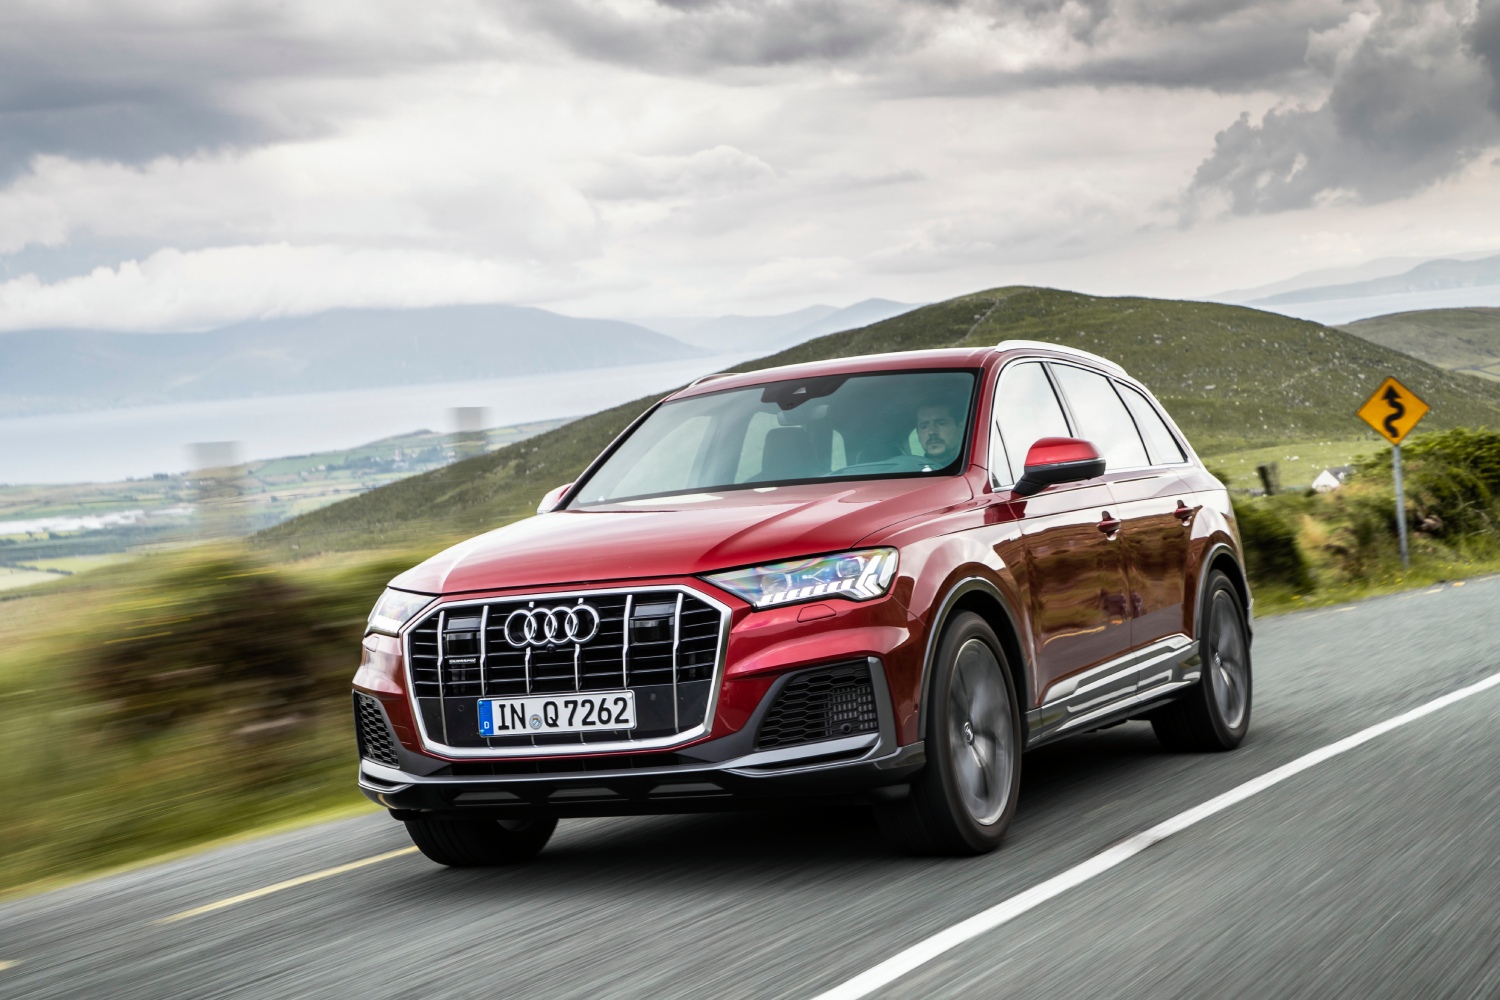 The best luxury SUVs for the family include this 2018 Audi Q7